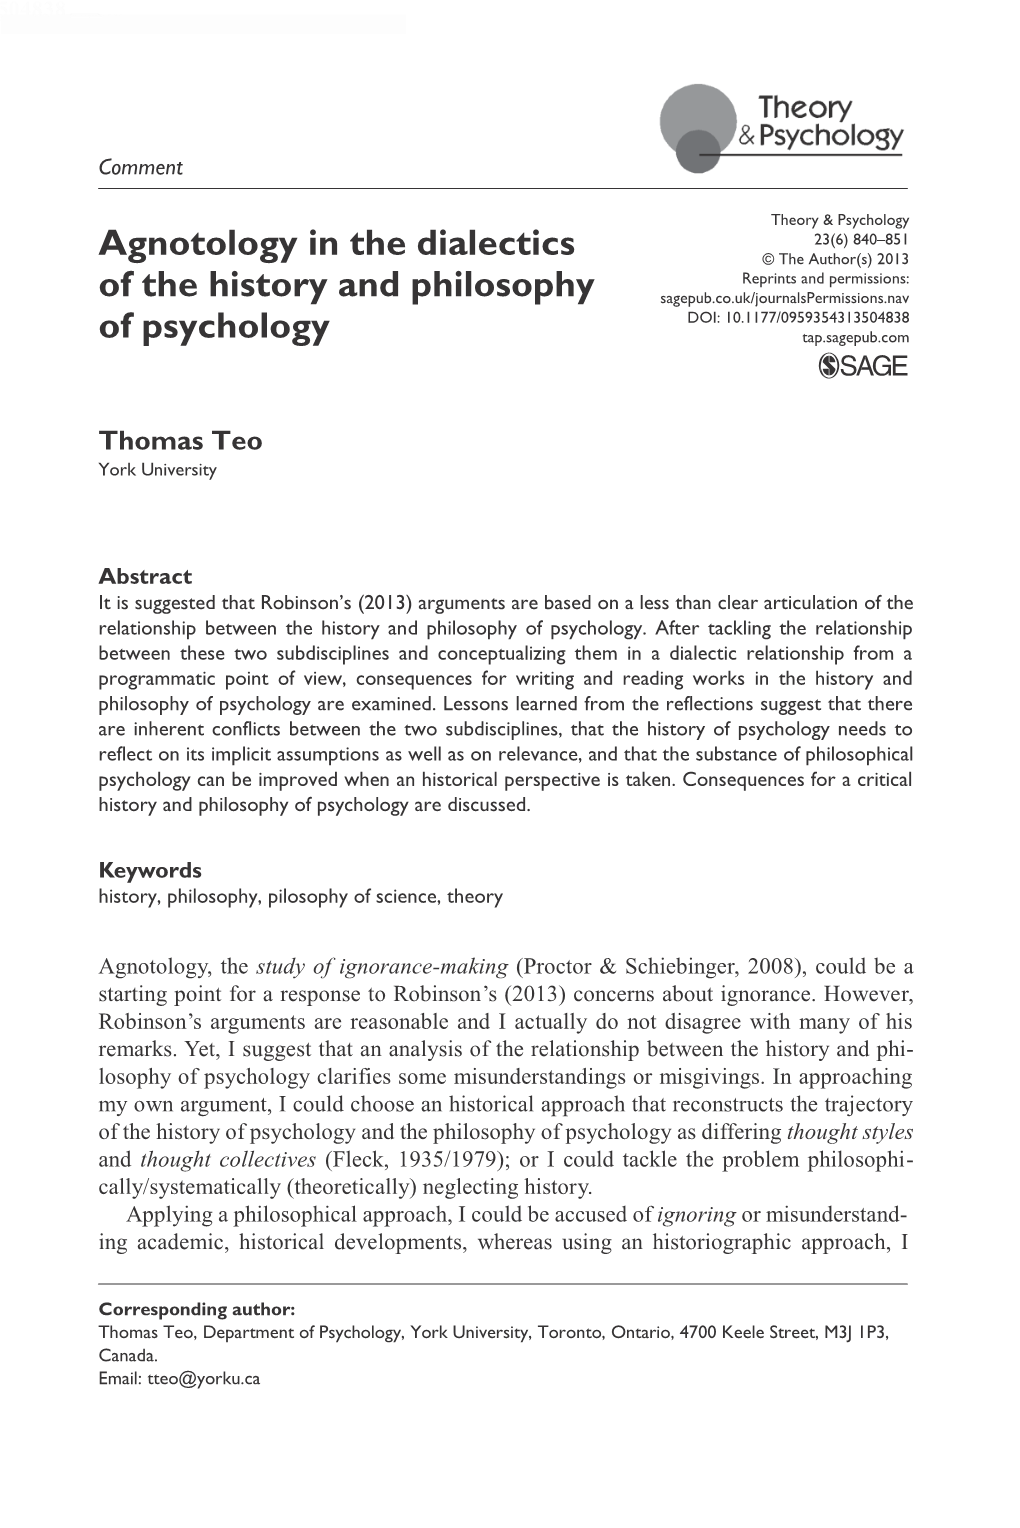 Agnotology in the Dialectics of the History and Philosophy of Psychology